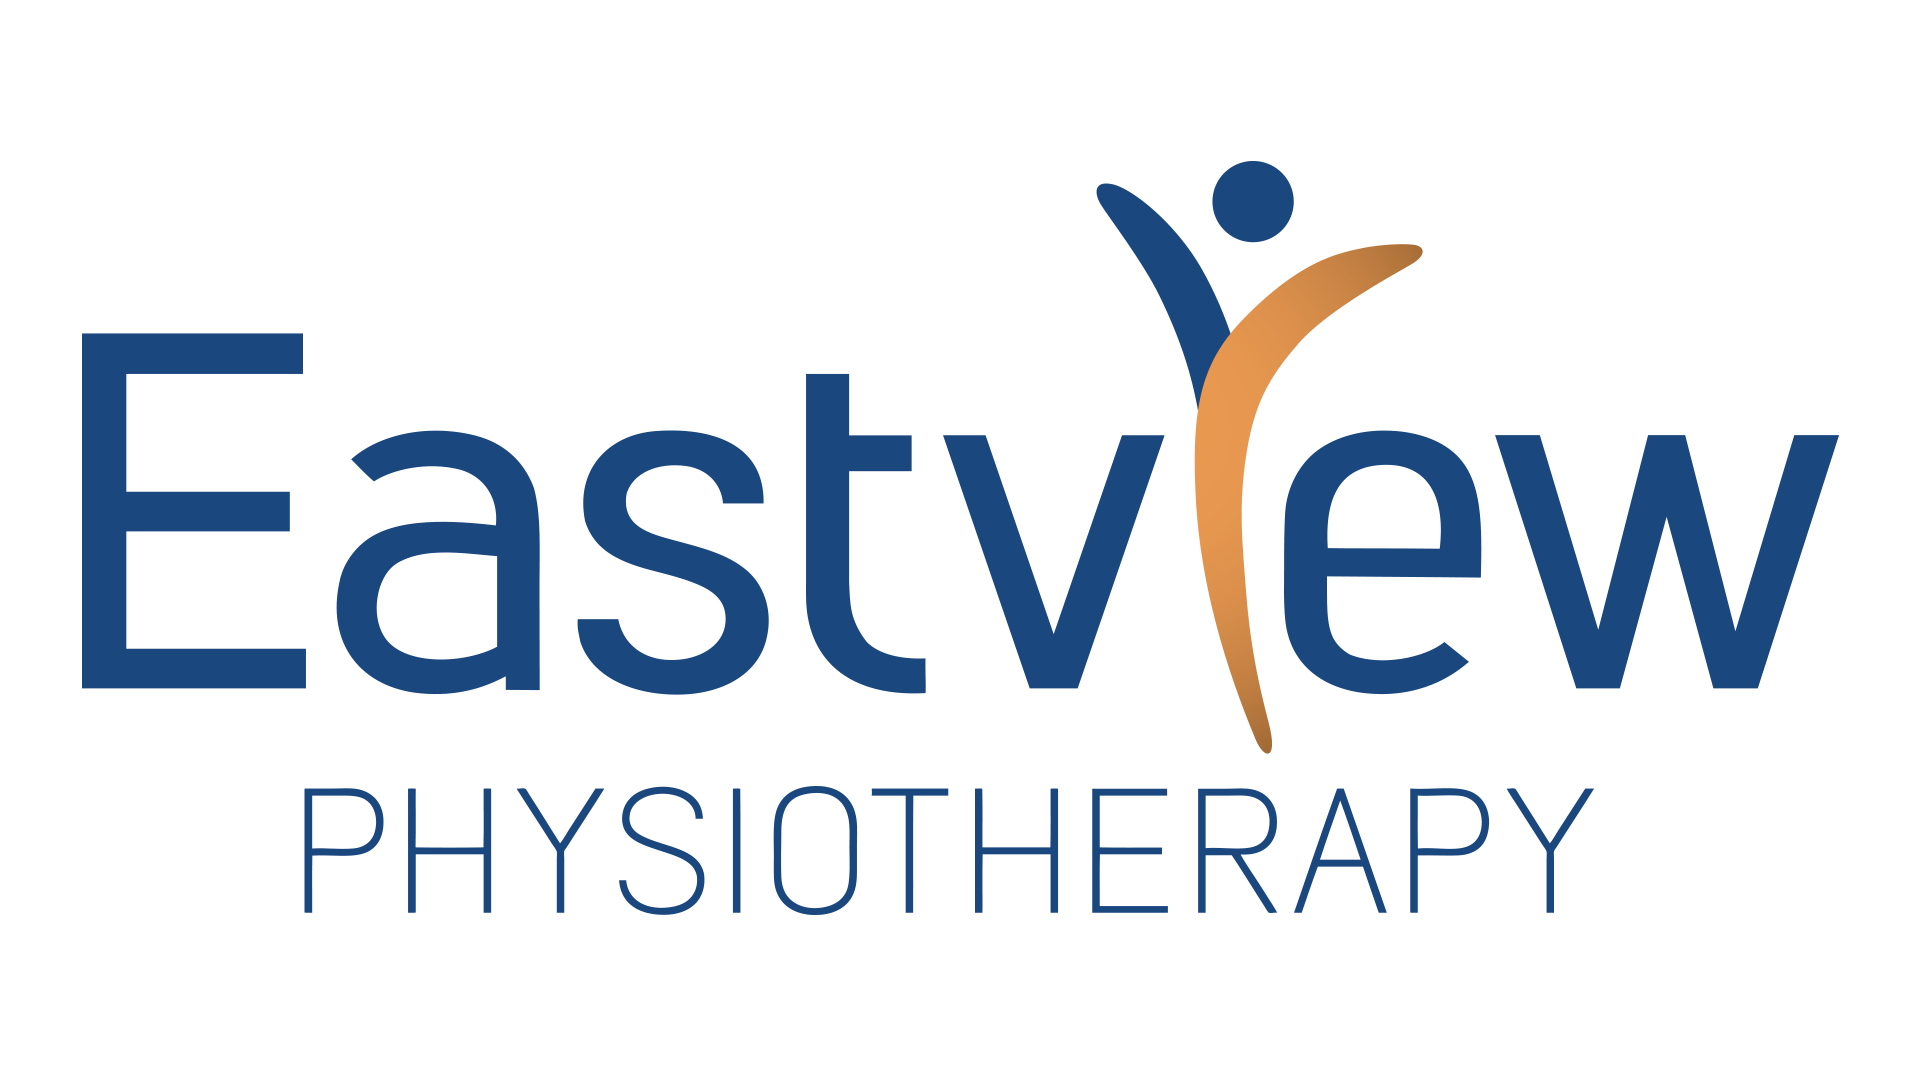 Eastview Physiotherapy